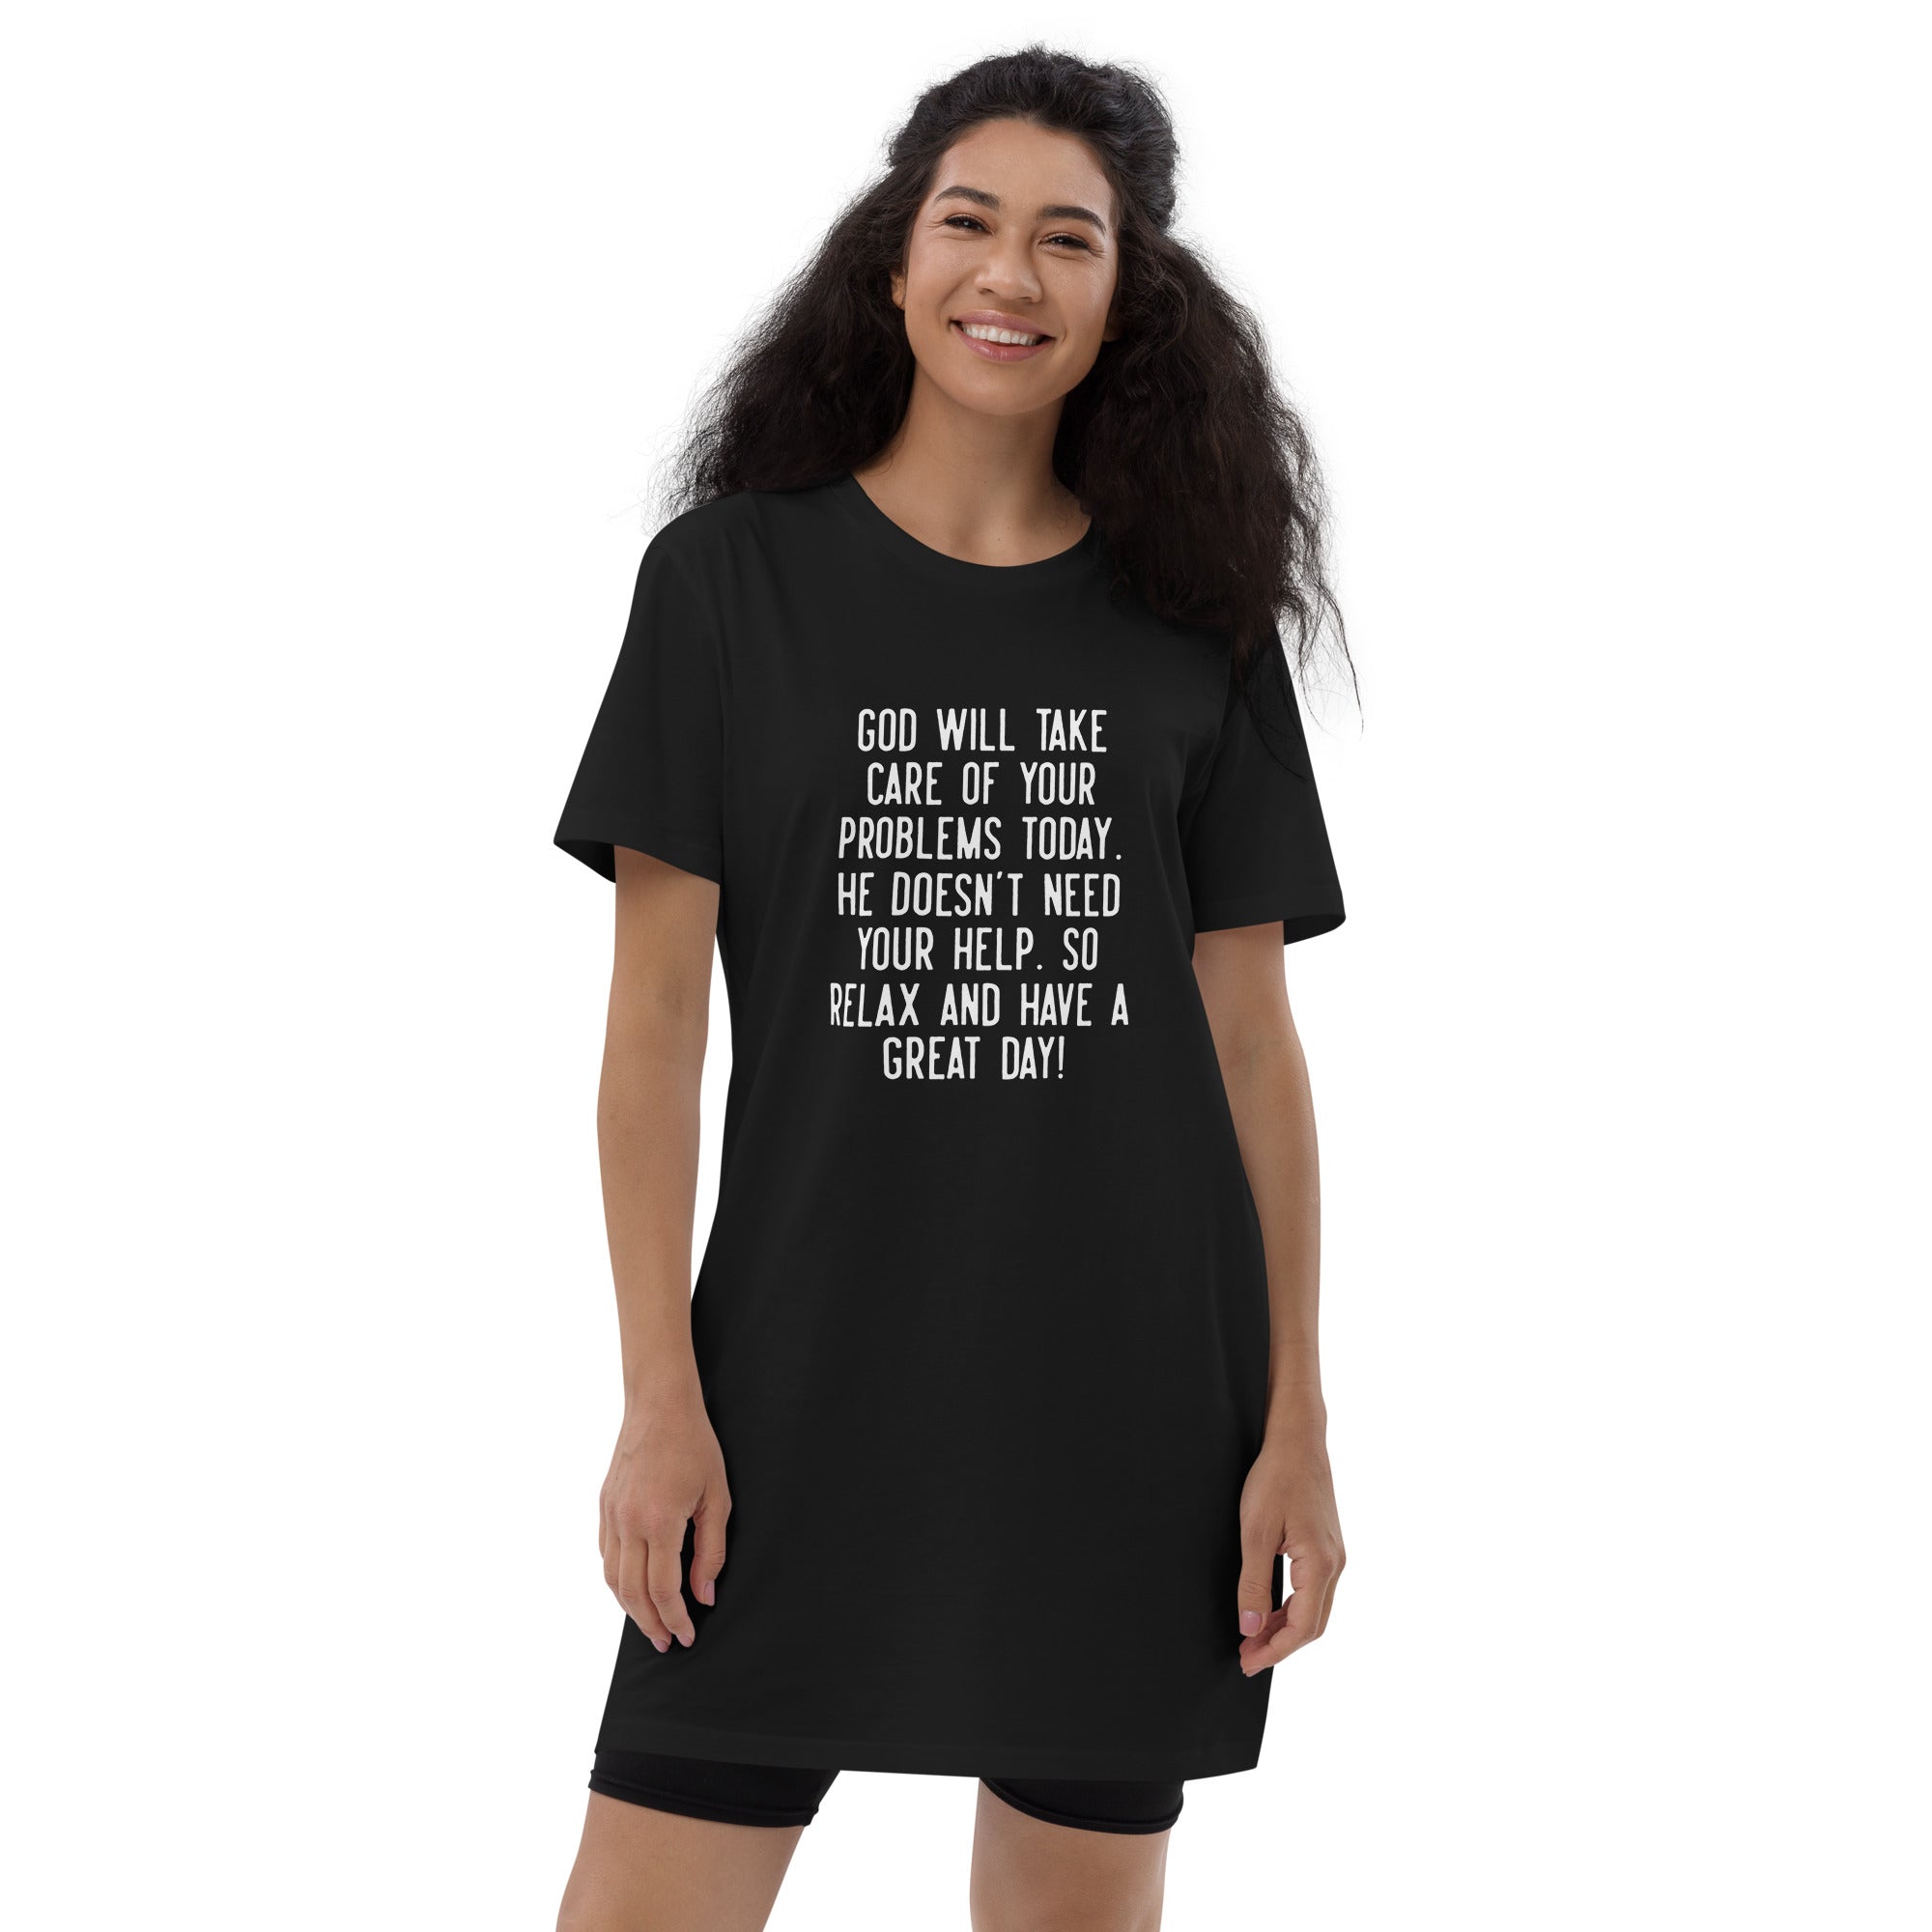 Relax and Have a Nice Day t-shirt dress